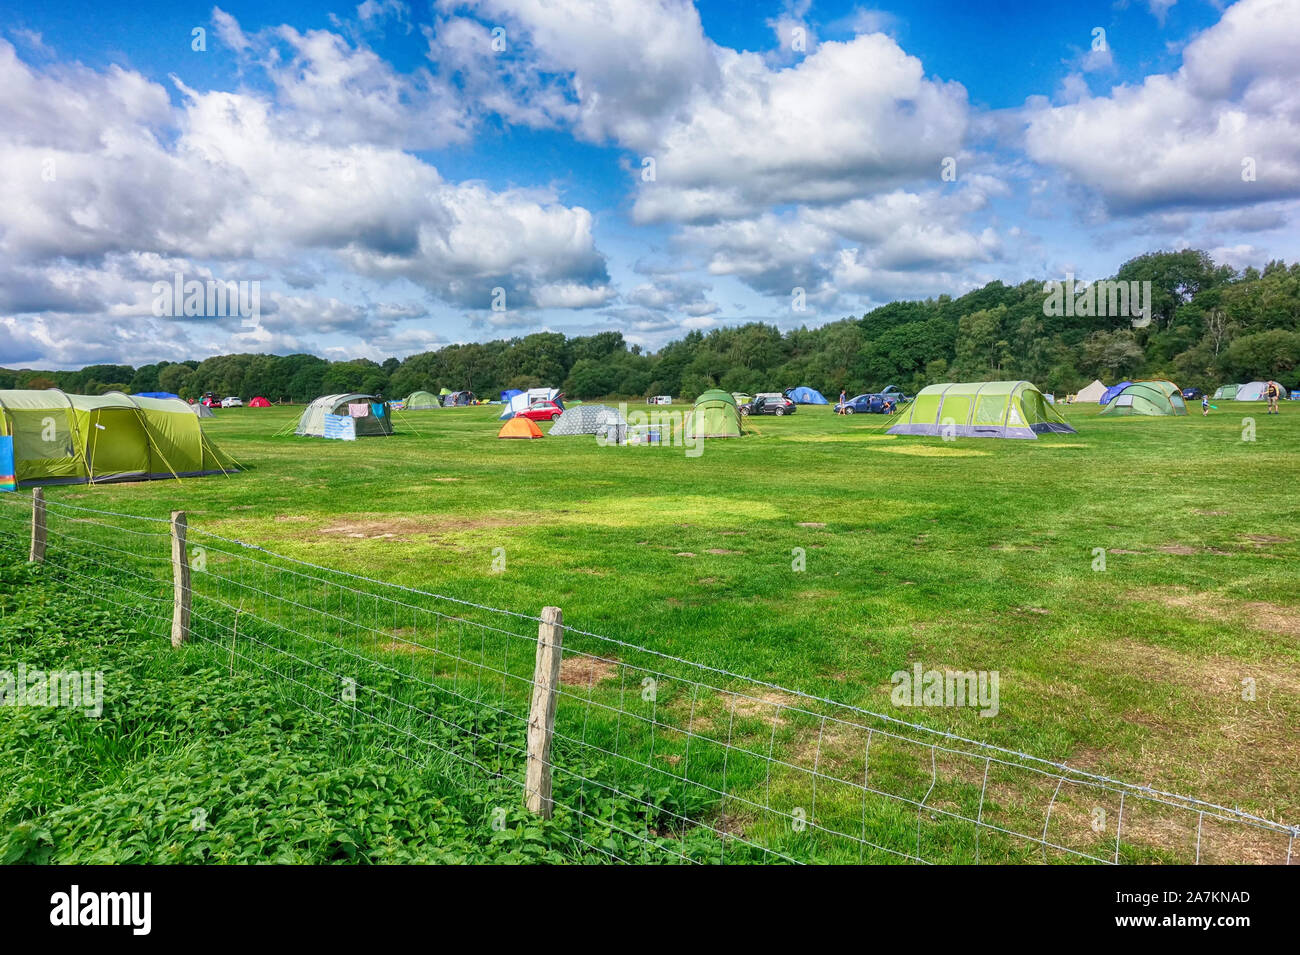 Norden, England - Aug 29 2018: Colorful tents on a green field campsite under blue cloudy sky, with people camping and putting up their tent Stock Photo